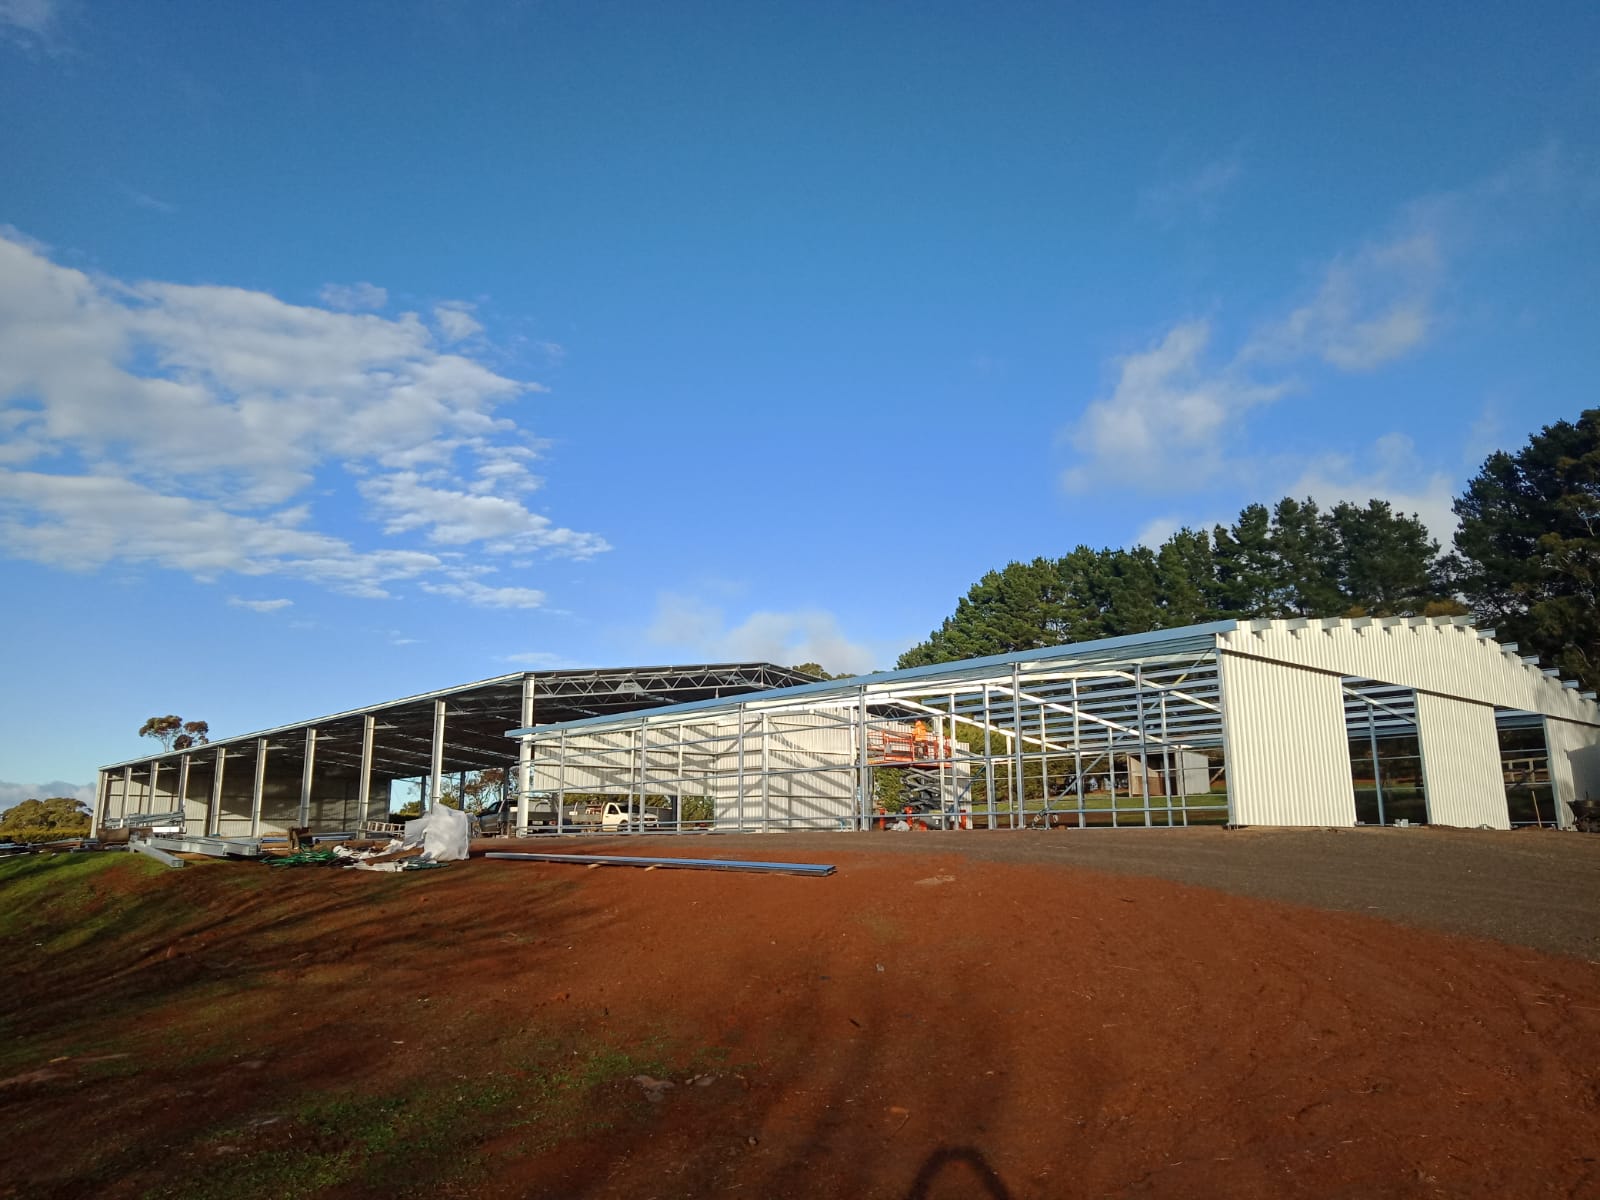 Hamish Sutherland combined indoor arena and stable complex